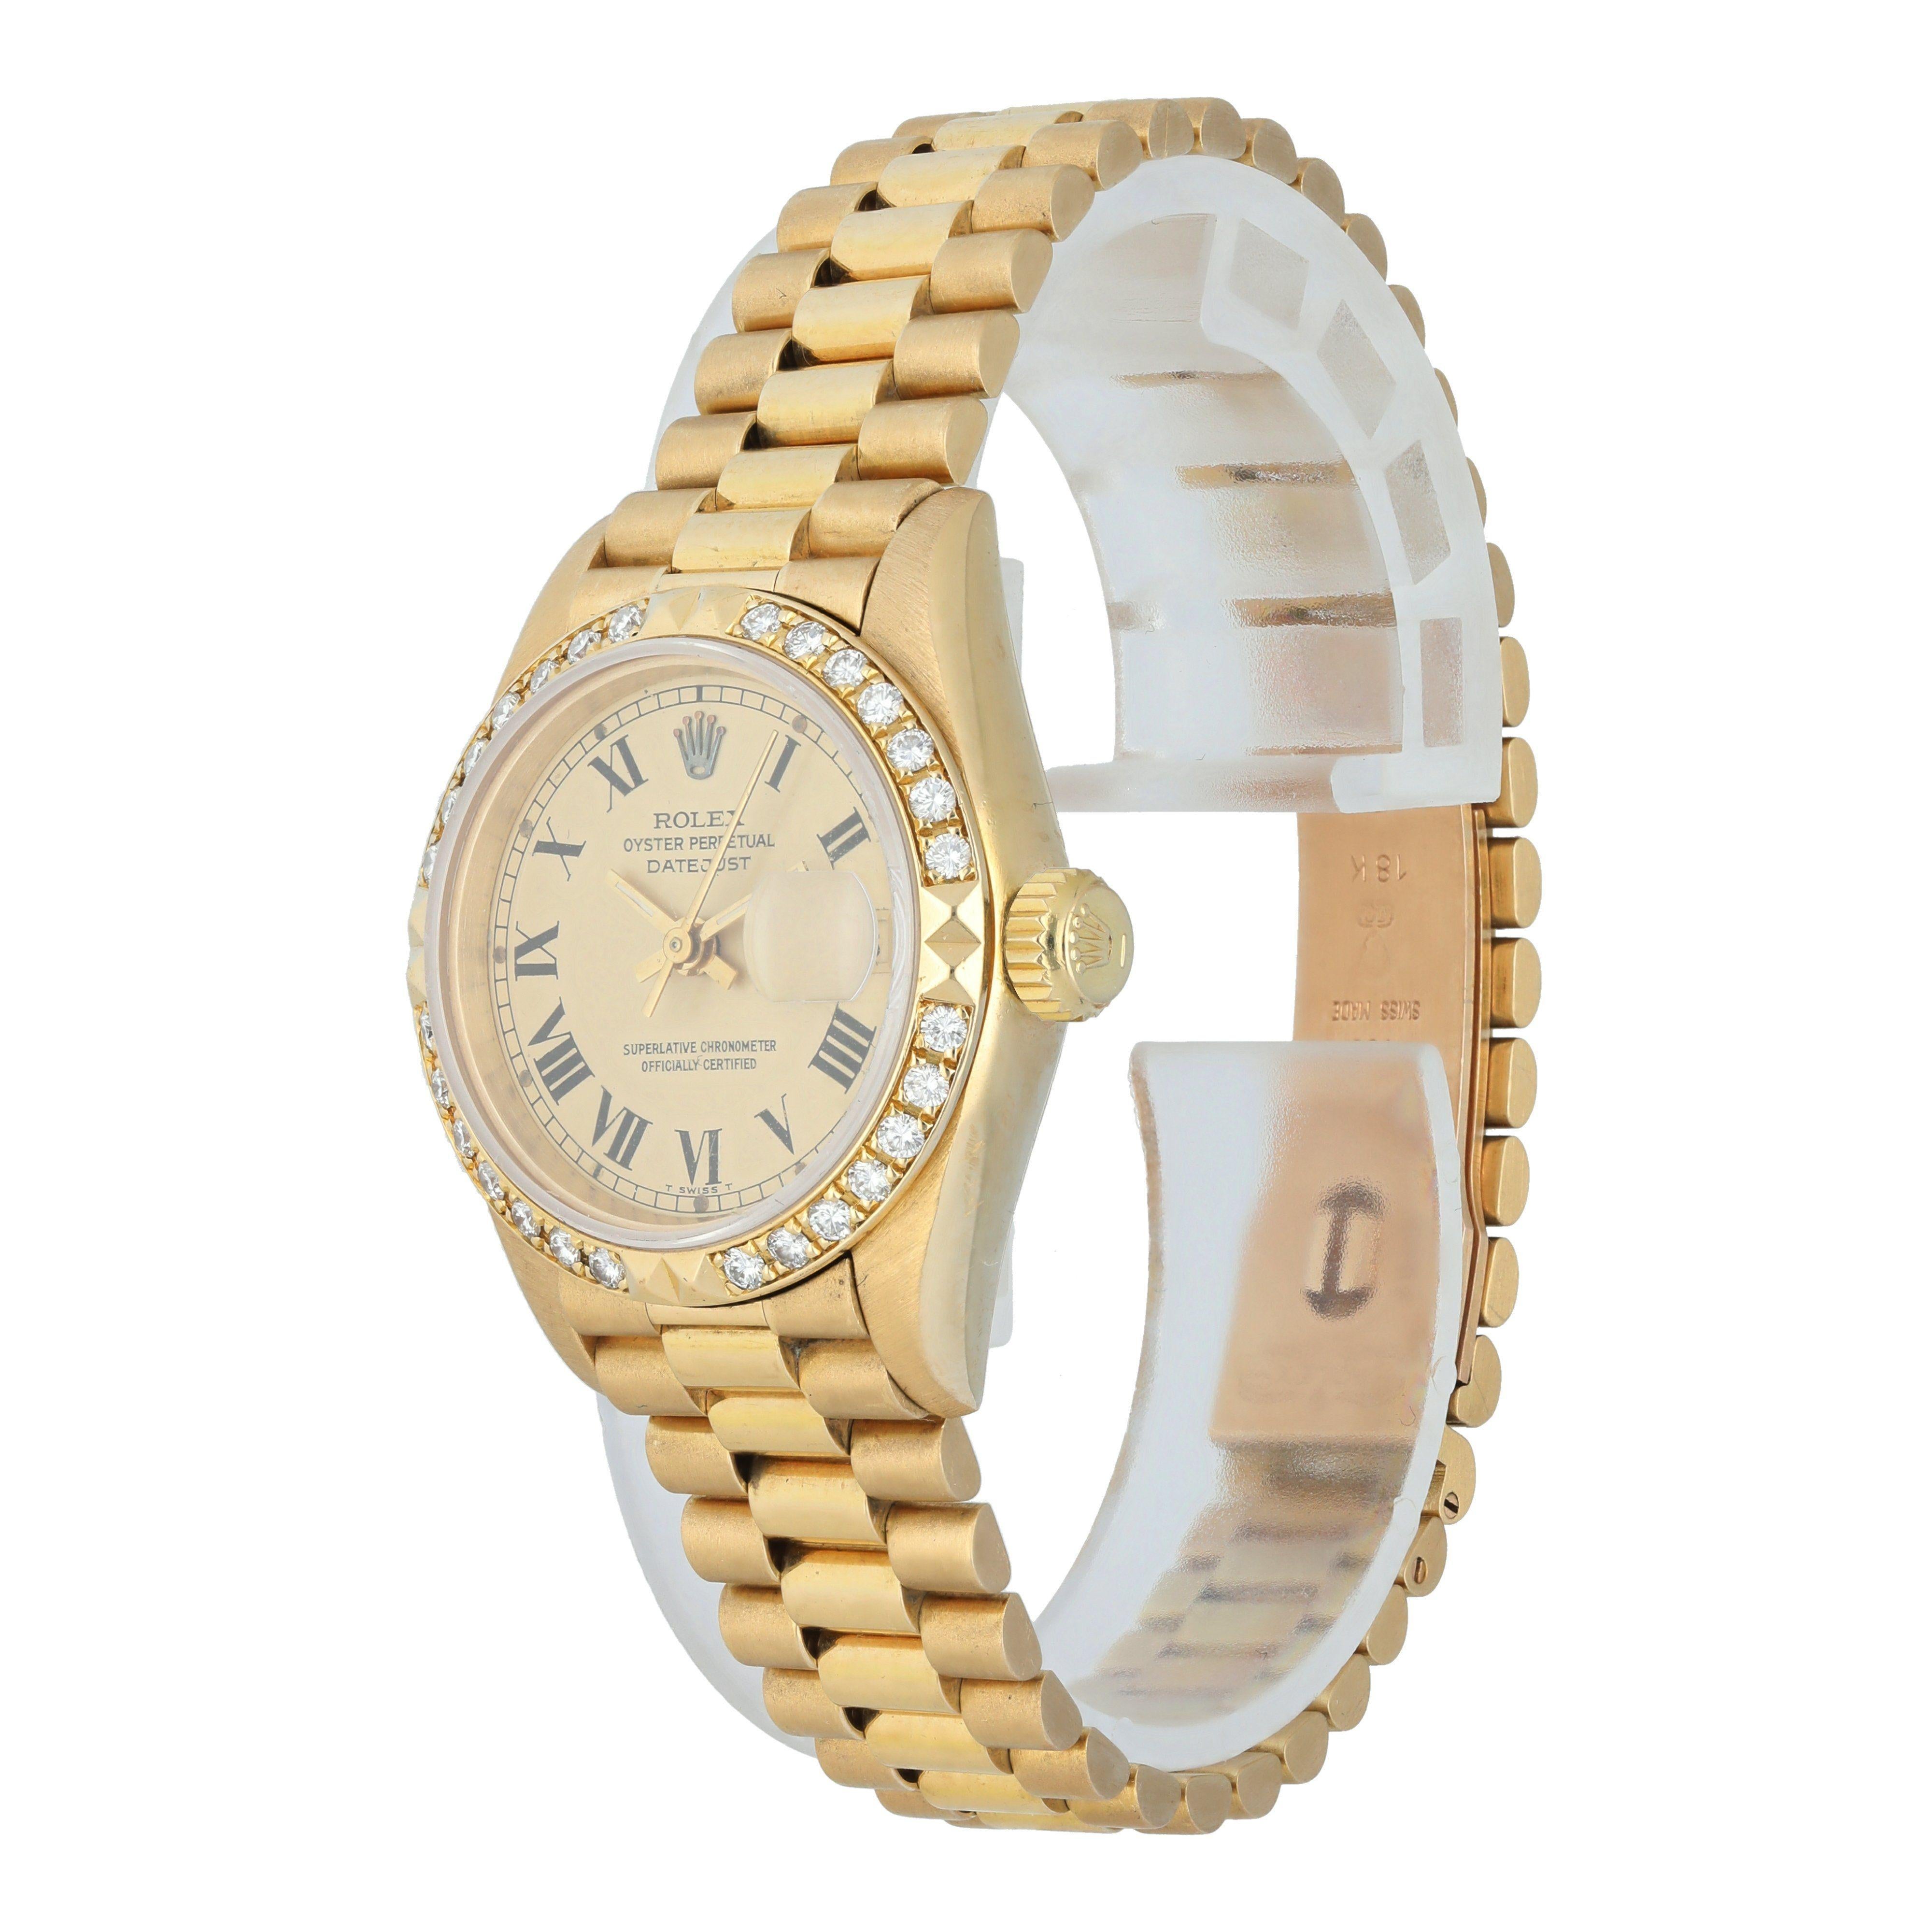 Rolex Datejust 69268 Ladies Watch. 
26mm Yellow-gold case. 
Factory diamond bezel.
Champagne dial with gold hands and roman numeral hour markers. 
Minute markers on the outer dial. 
Date display at the 3 o'clock position. 
Yellow Gold Bracelet with